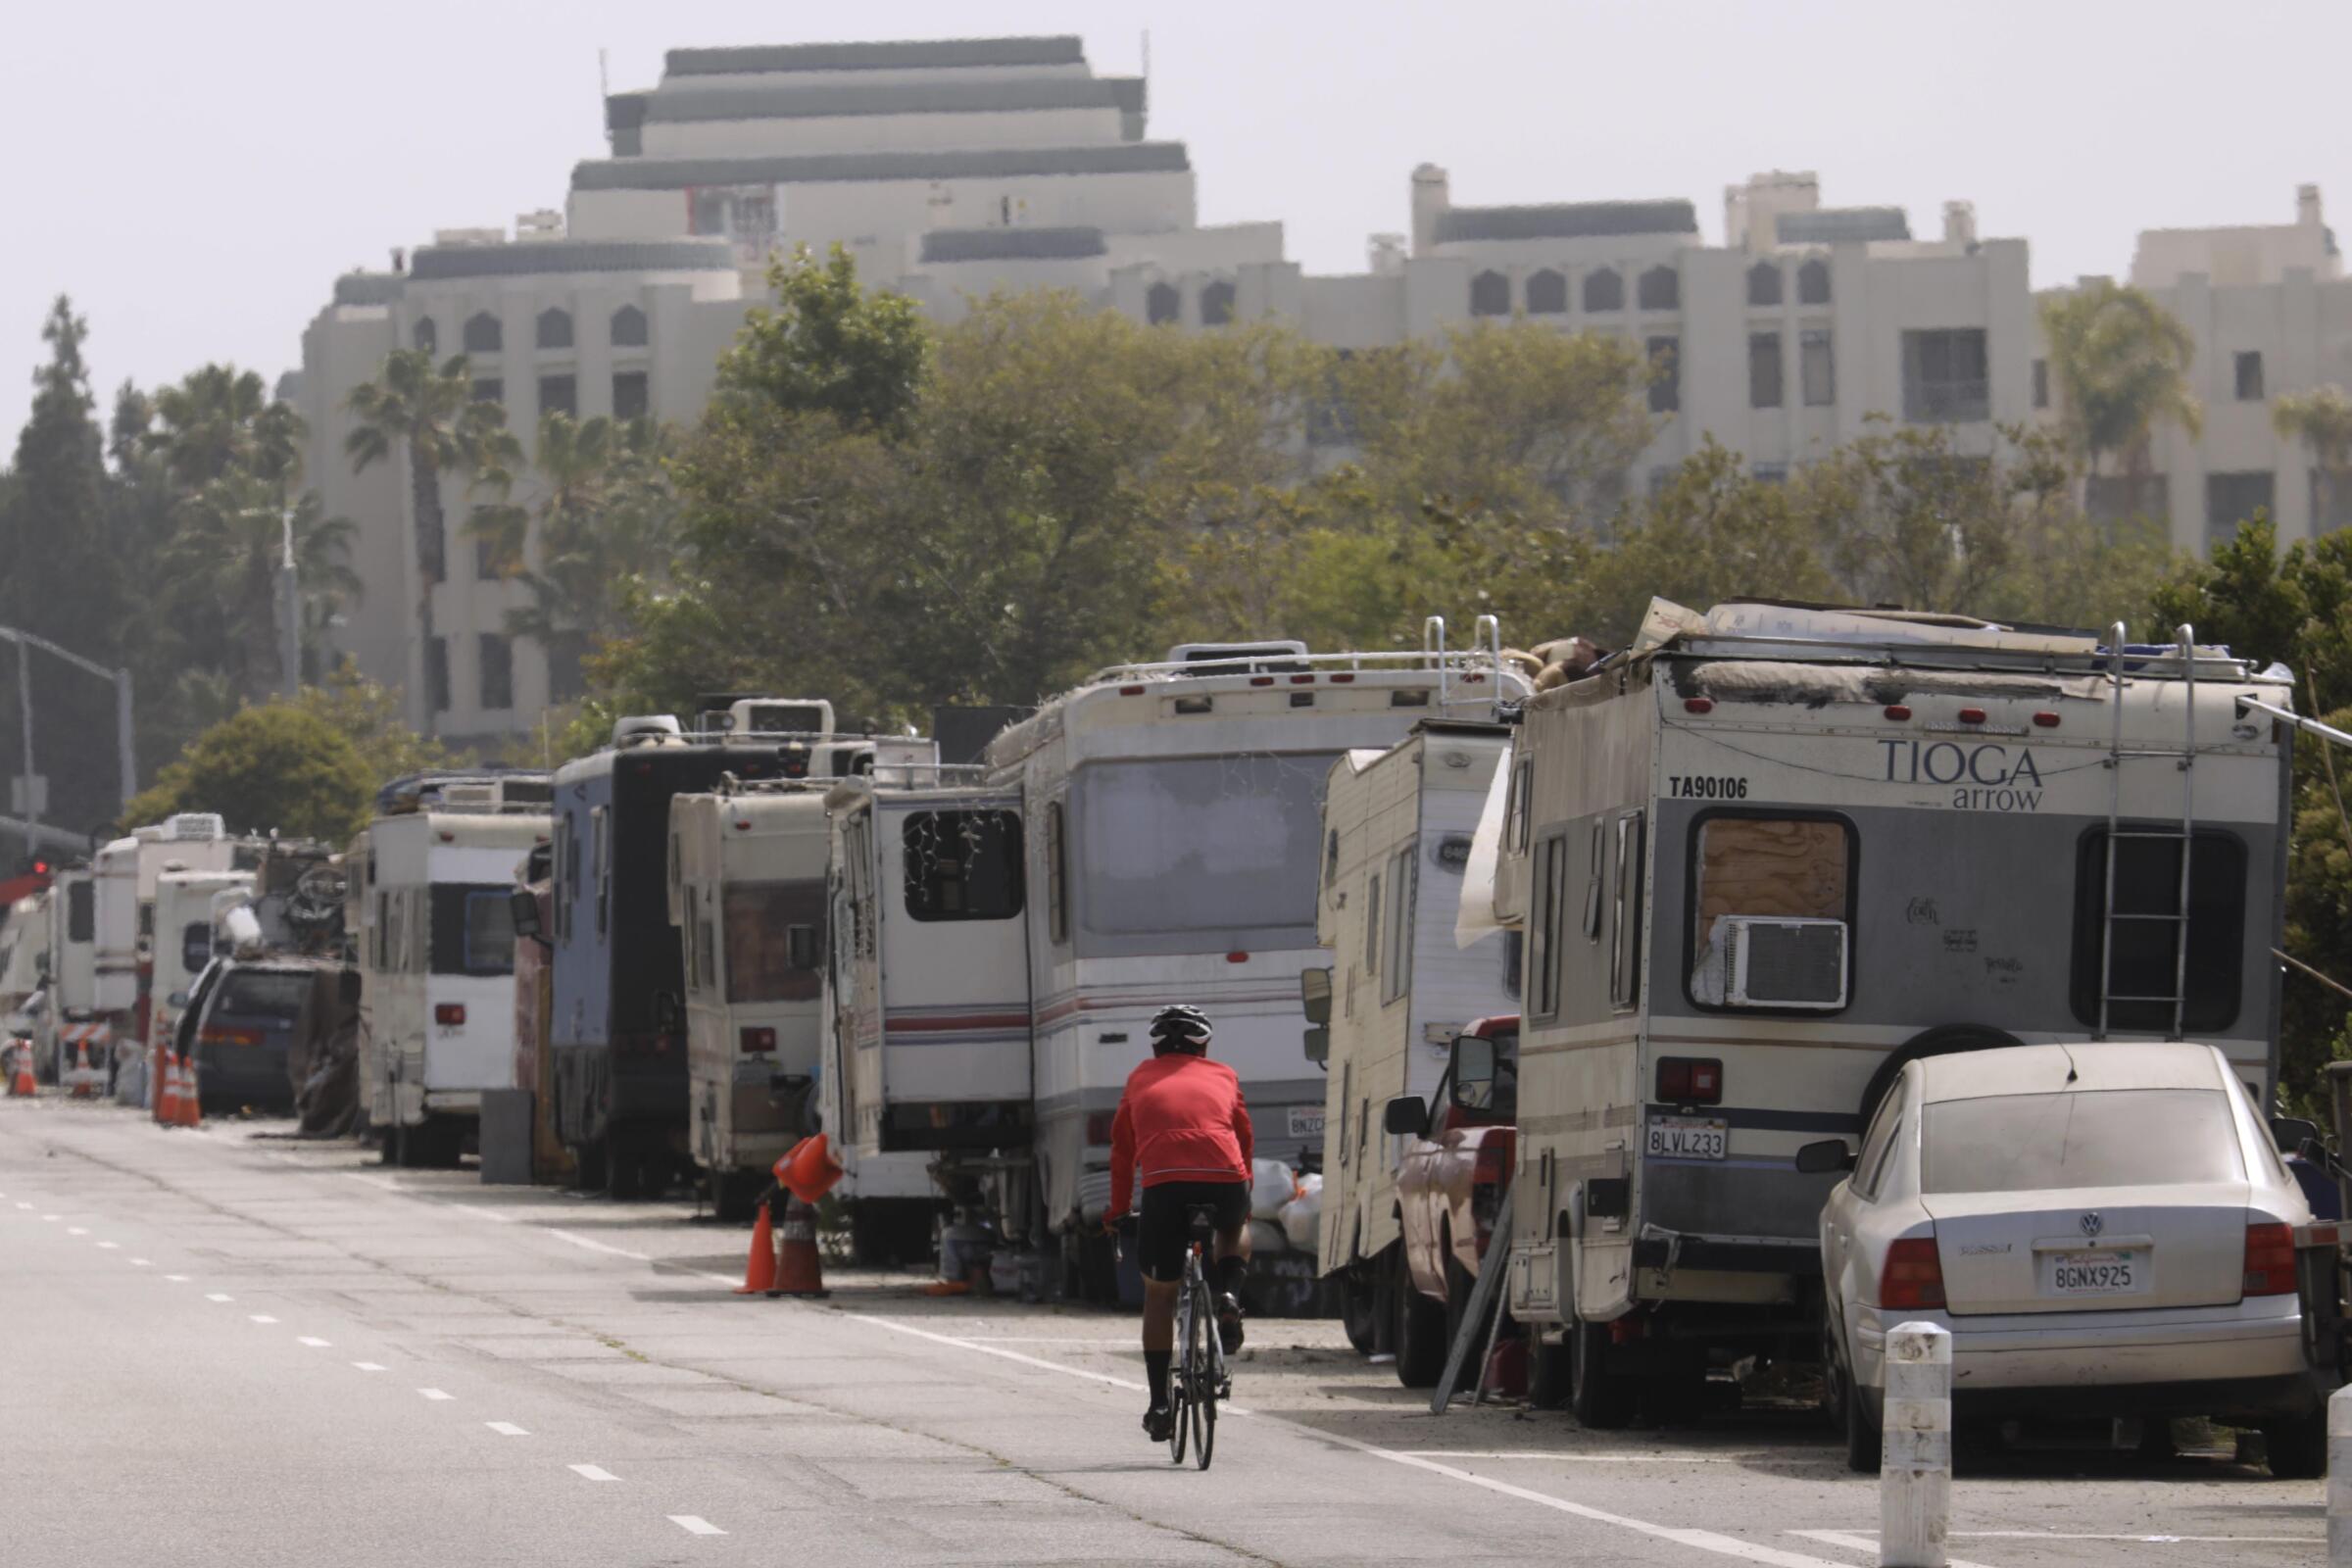 A row of parked RVs and cars on a street.